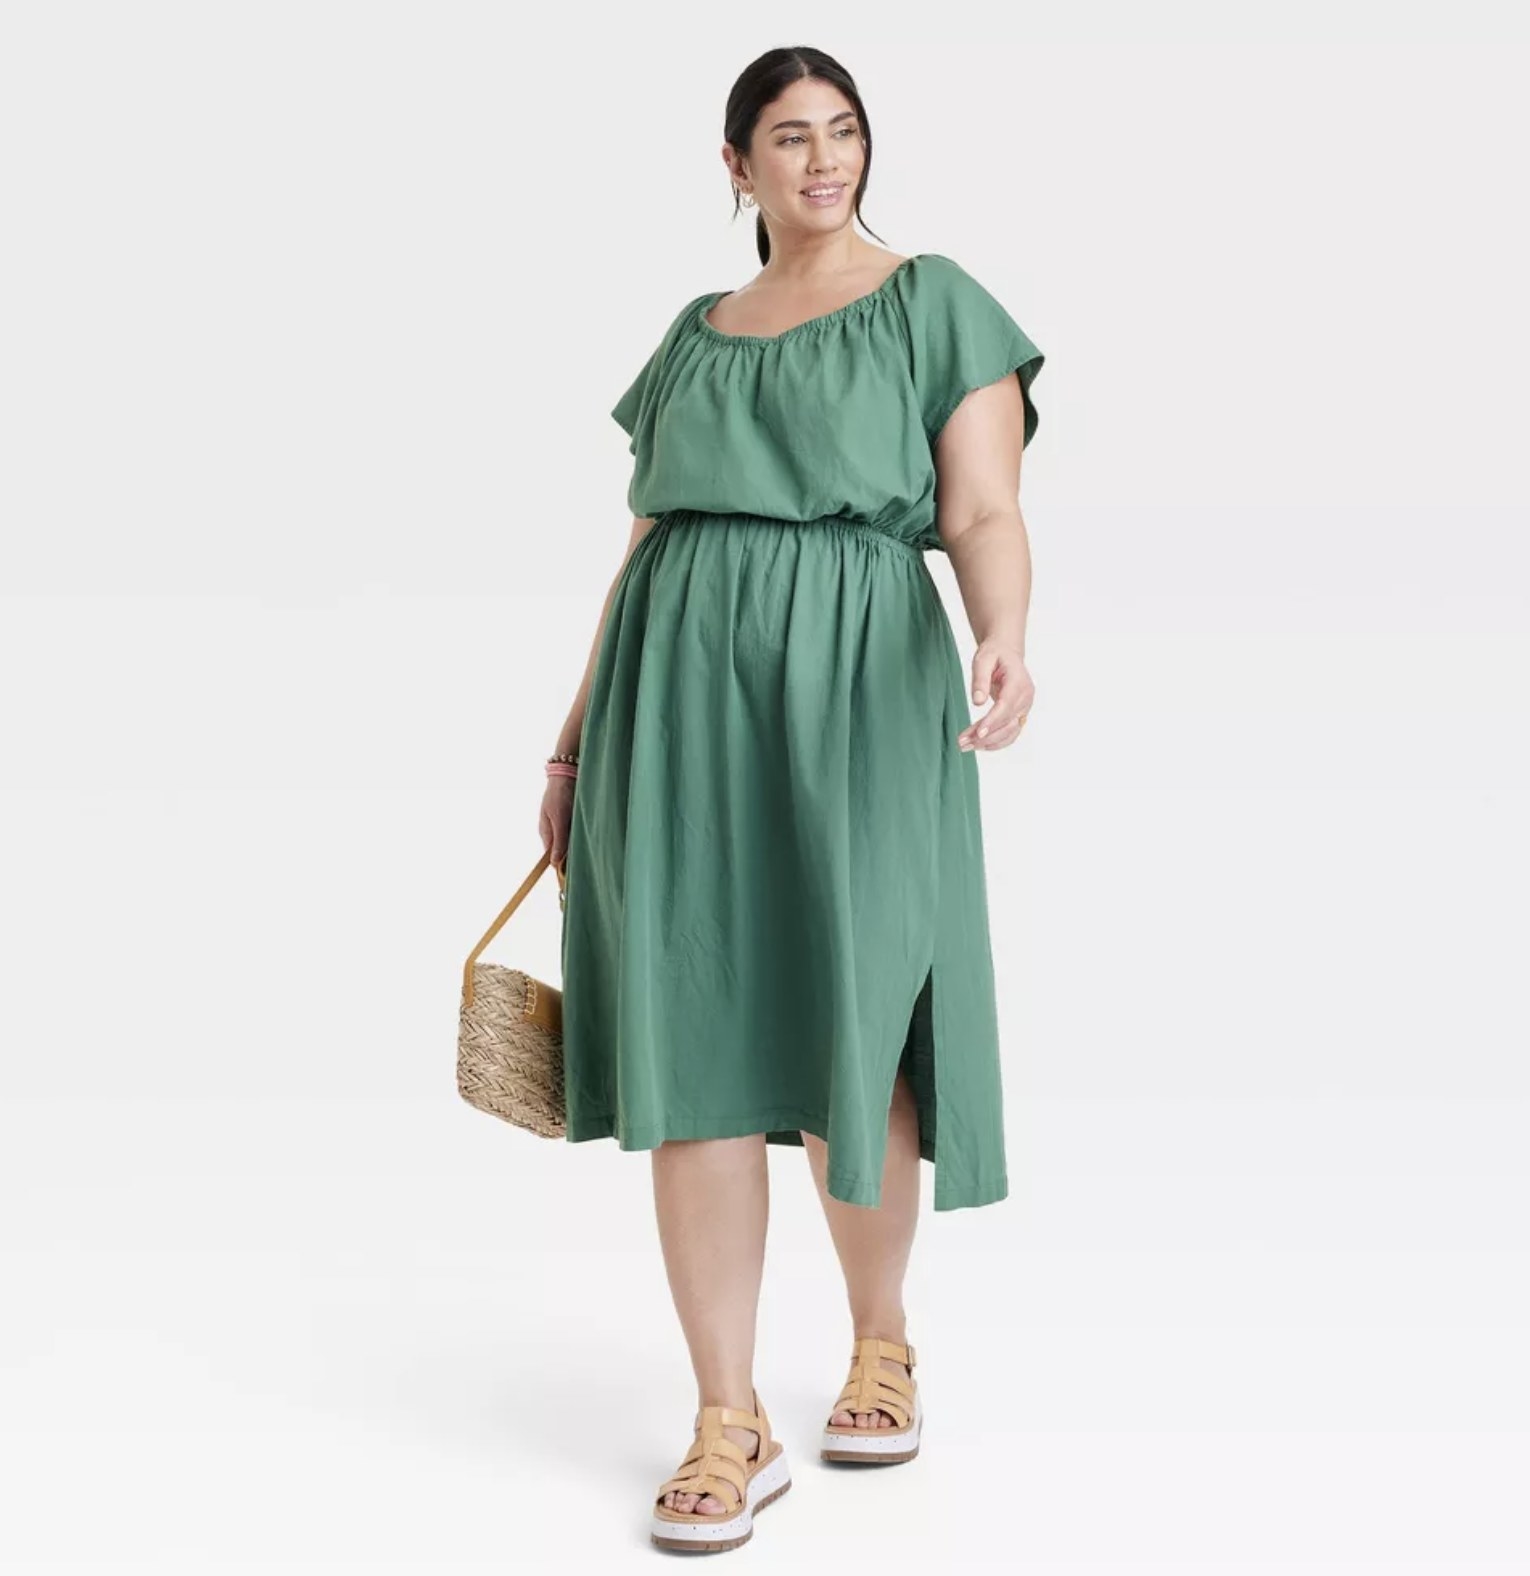 the dress in green